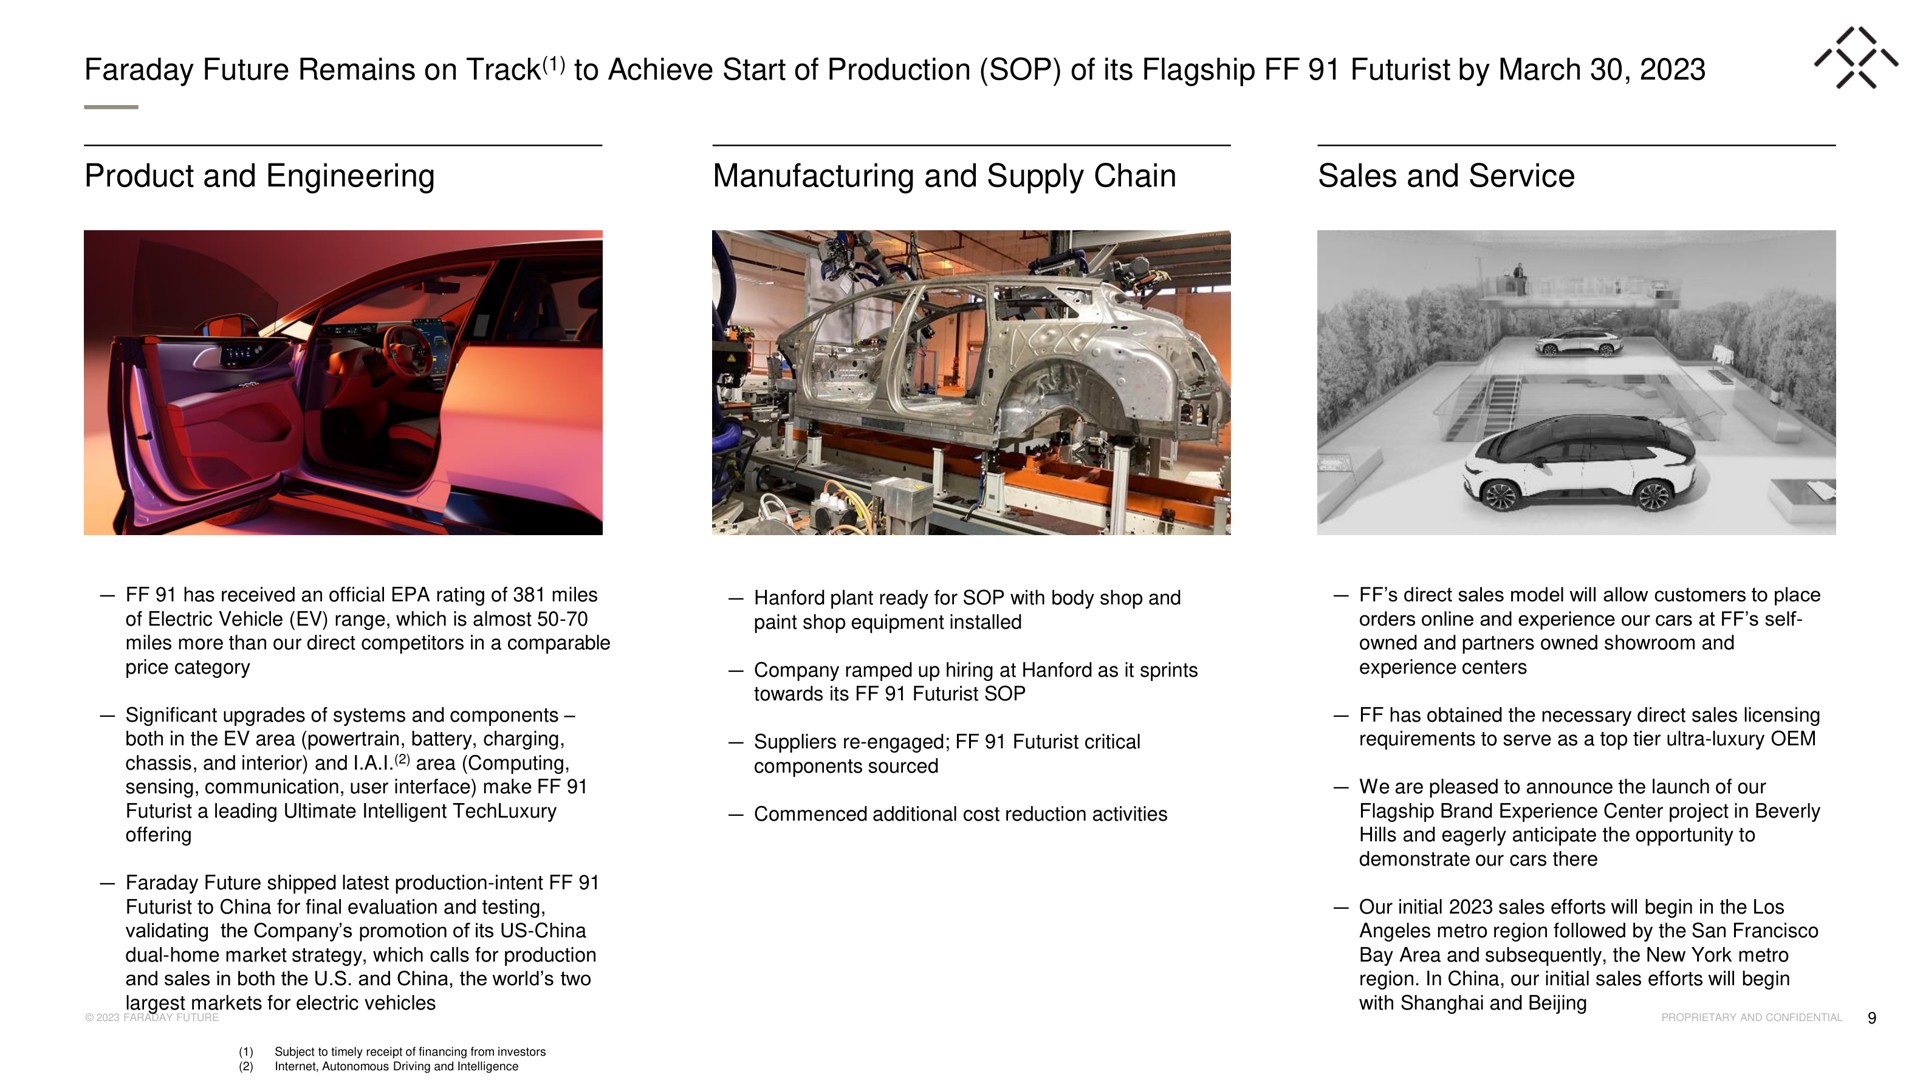 faraday future remains on track to achieve start of production sop of its flagship futurist by march product and engineering manufacturing and supply chain sales and service | Faraday Future